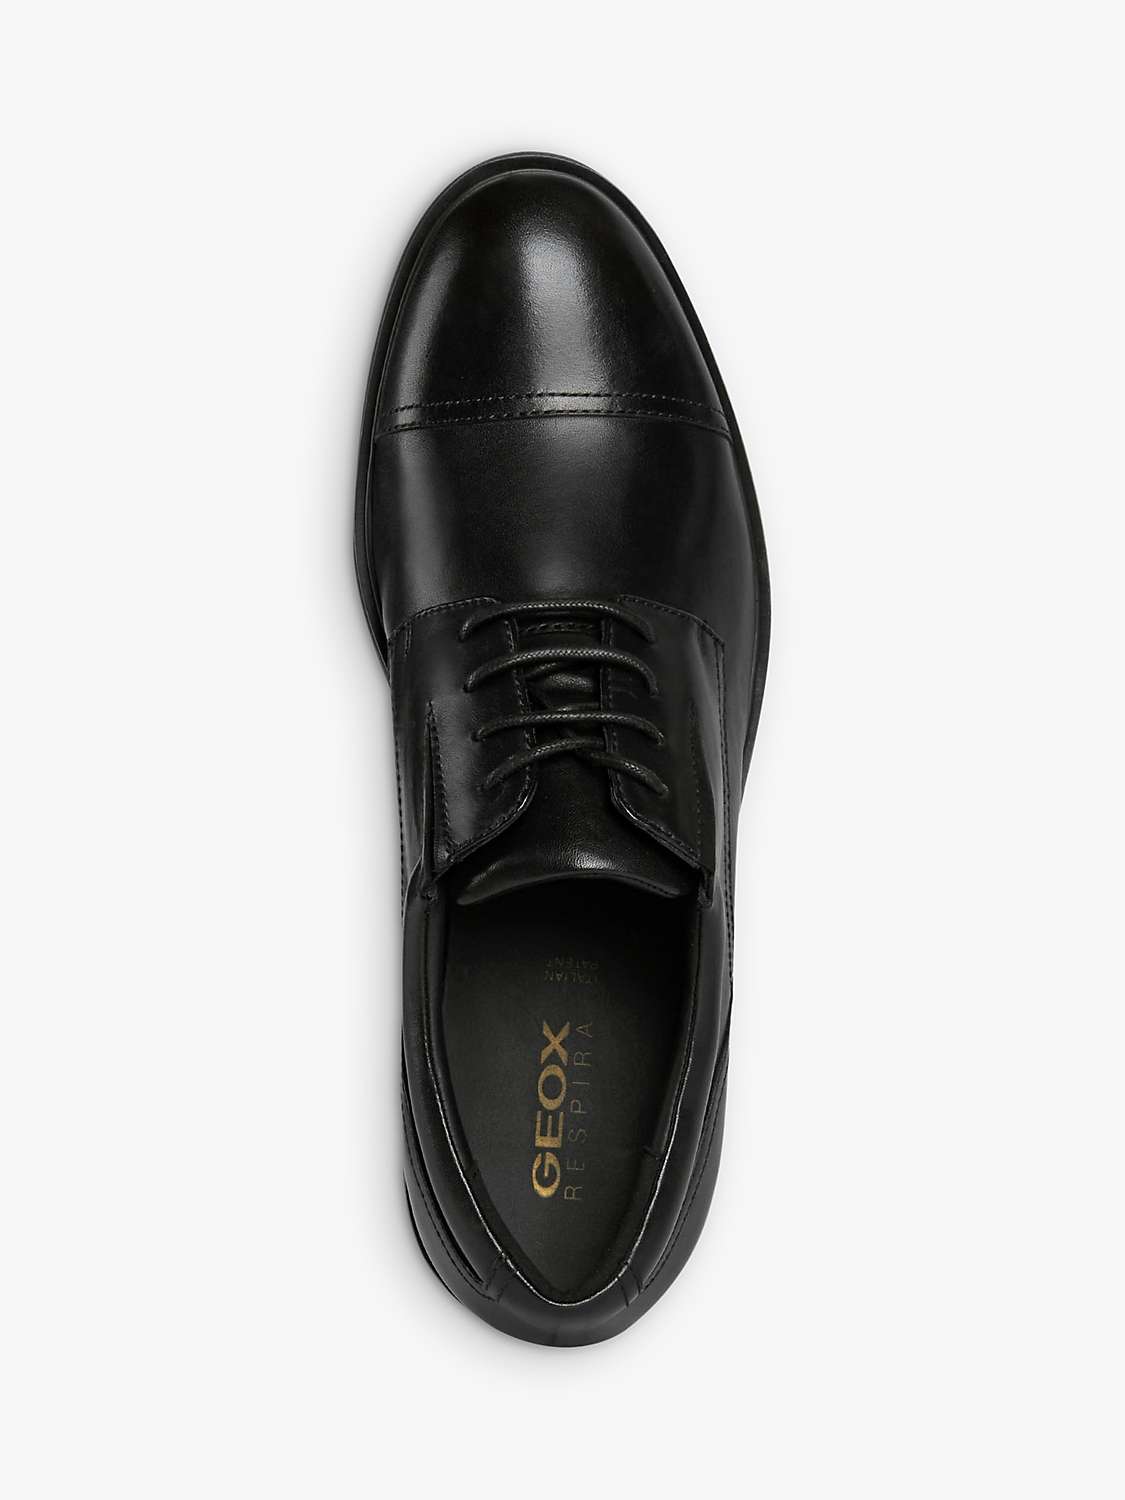 Cafe core lifetime Geox Appiano Leather Oxford Shoes, Black at John Lewis & Partners